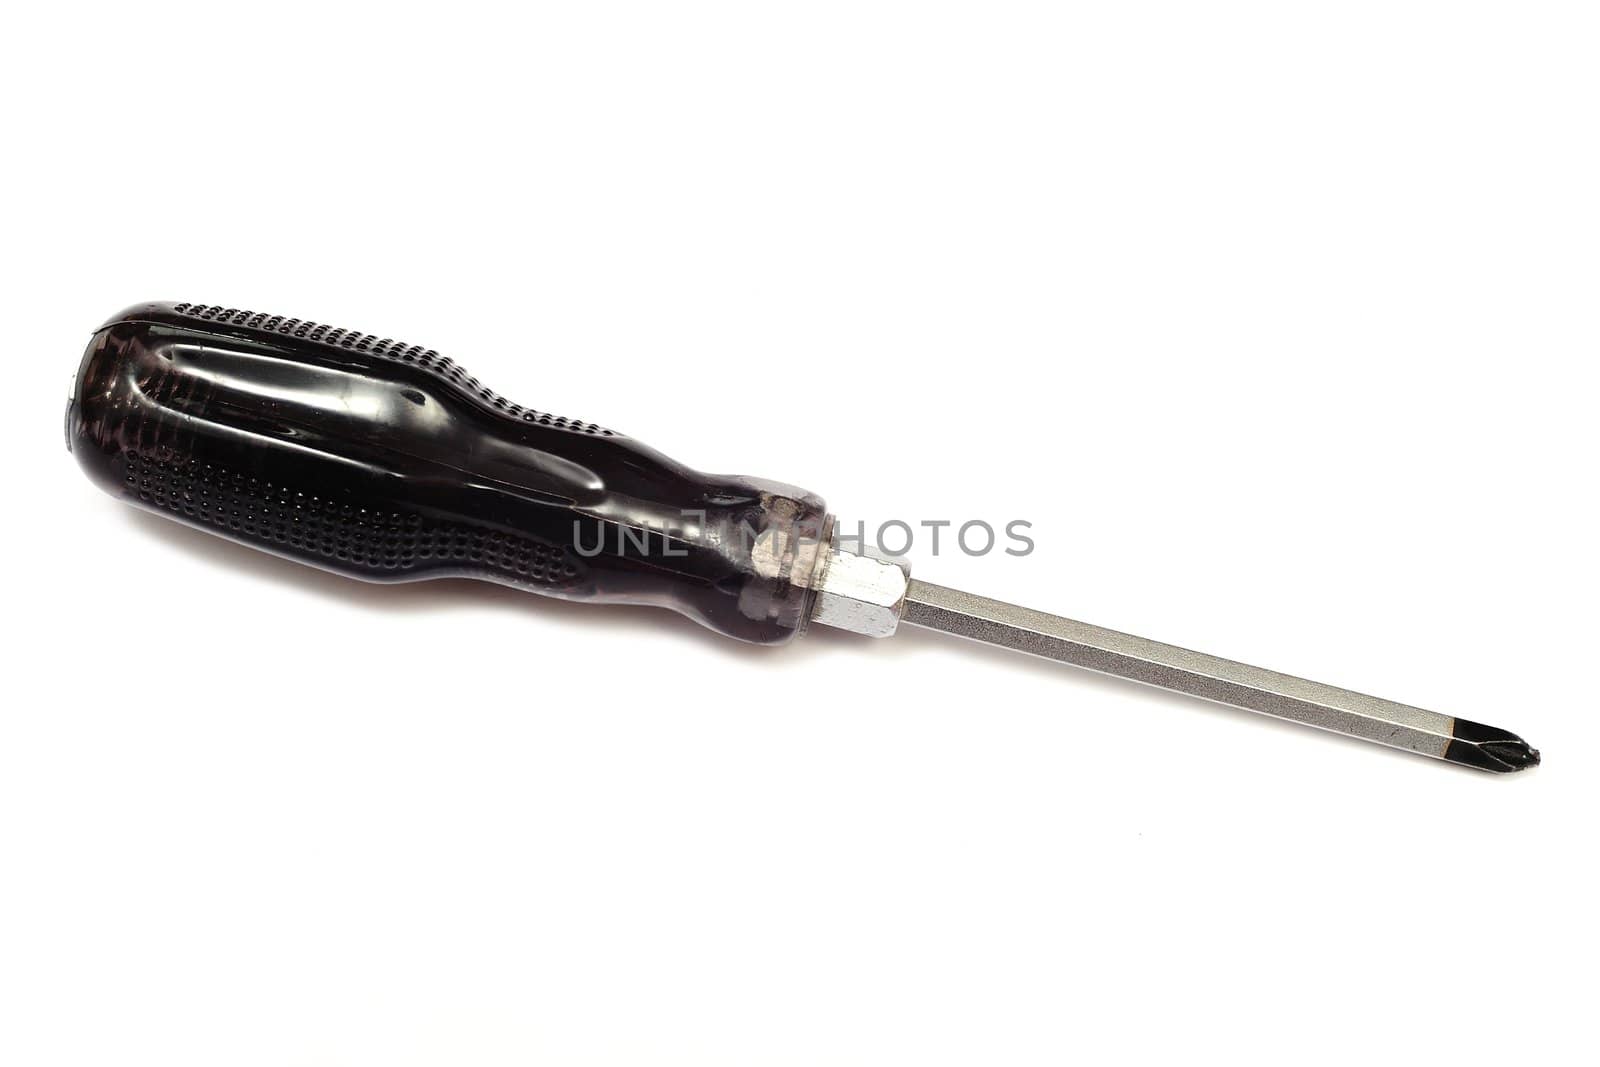 An image of black screwdriver on white 